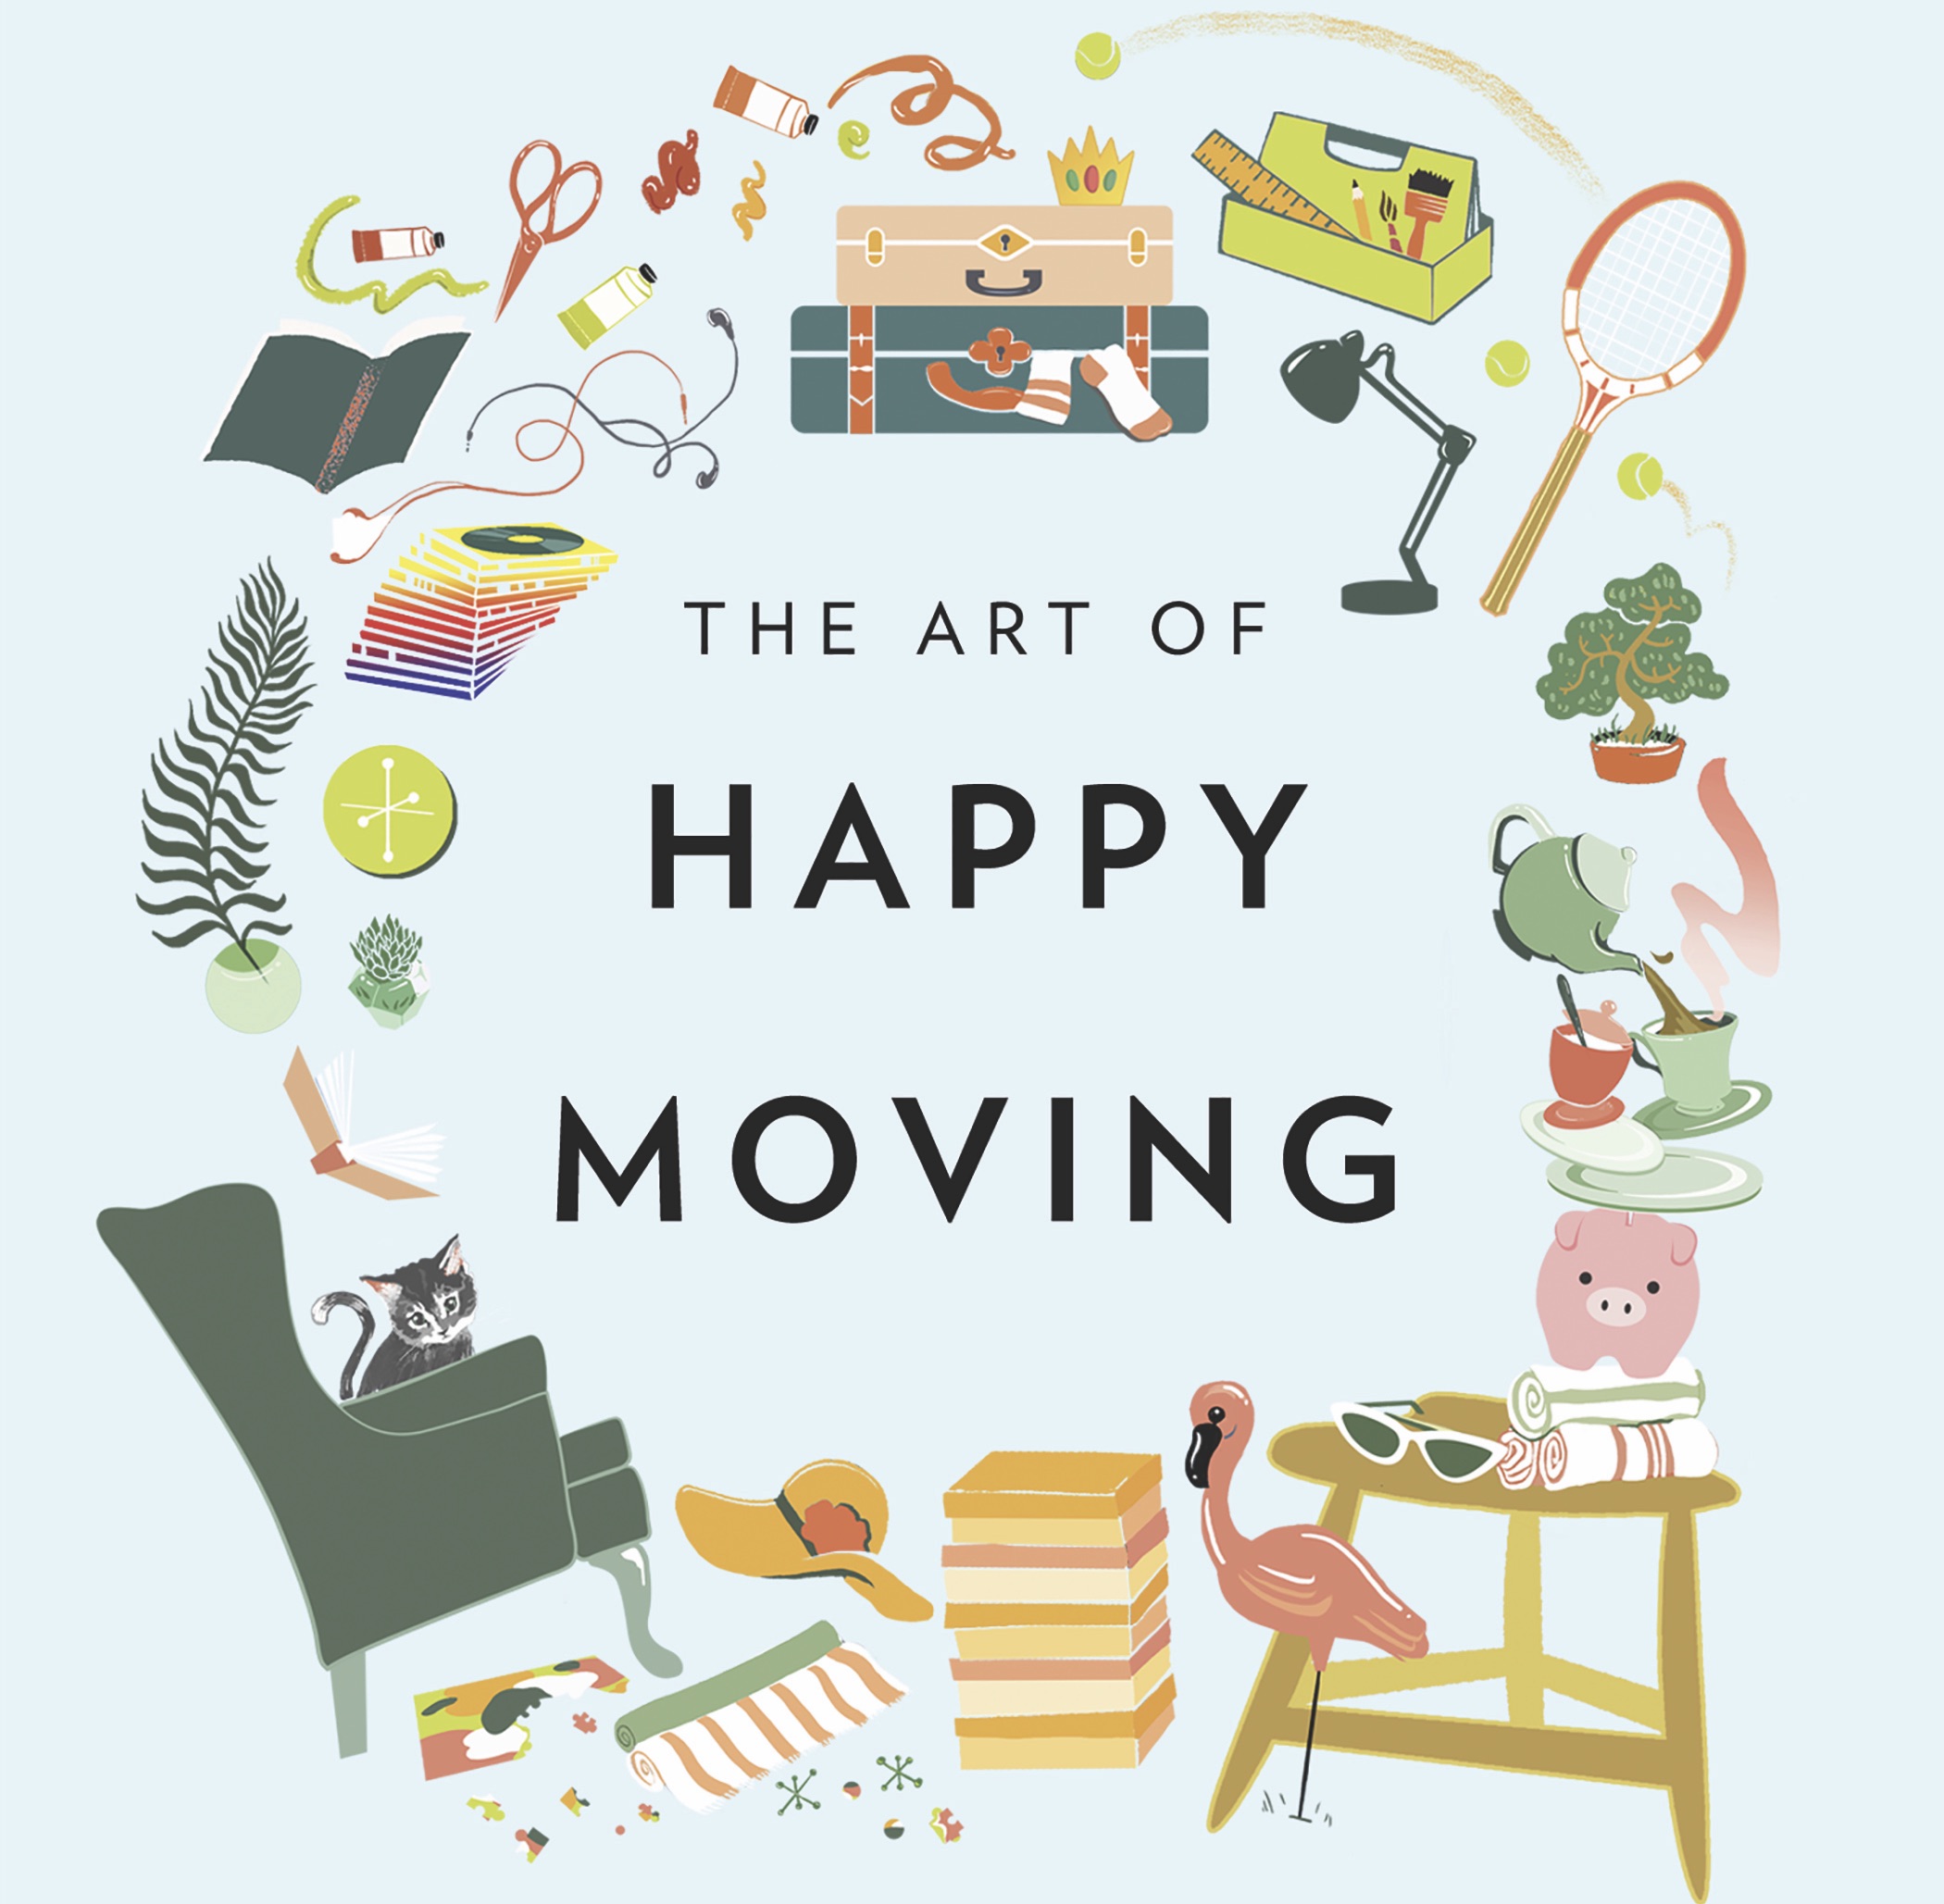 Ali Wenzke's The Art of Happy Moving is a c...